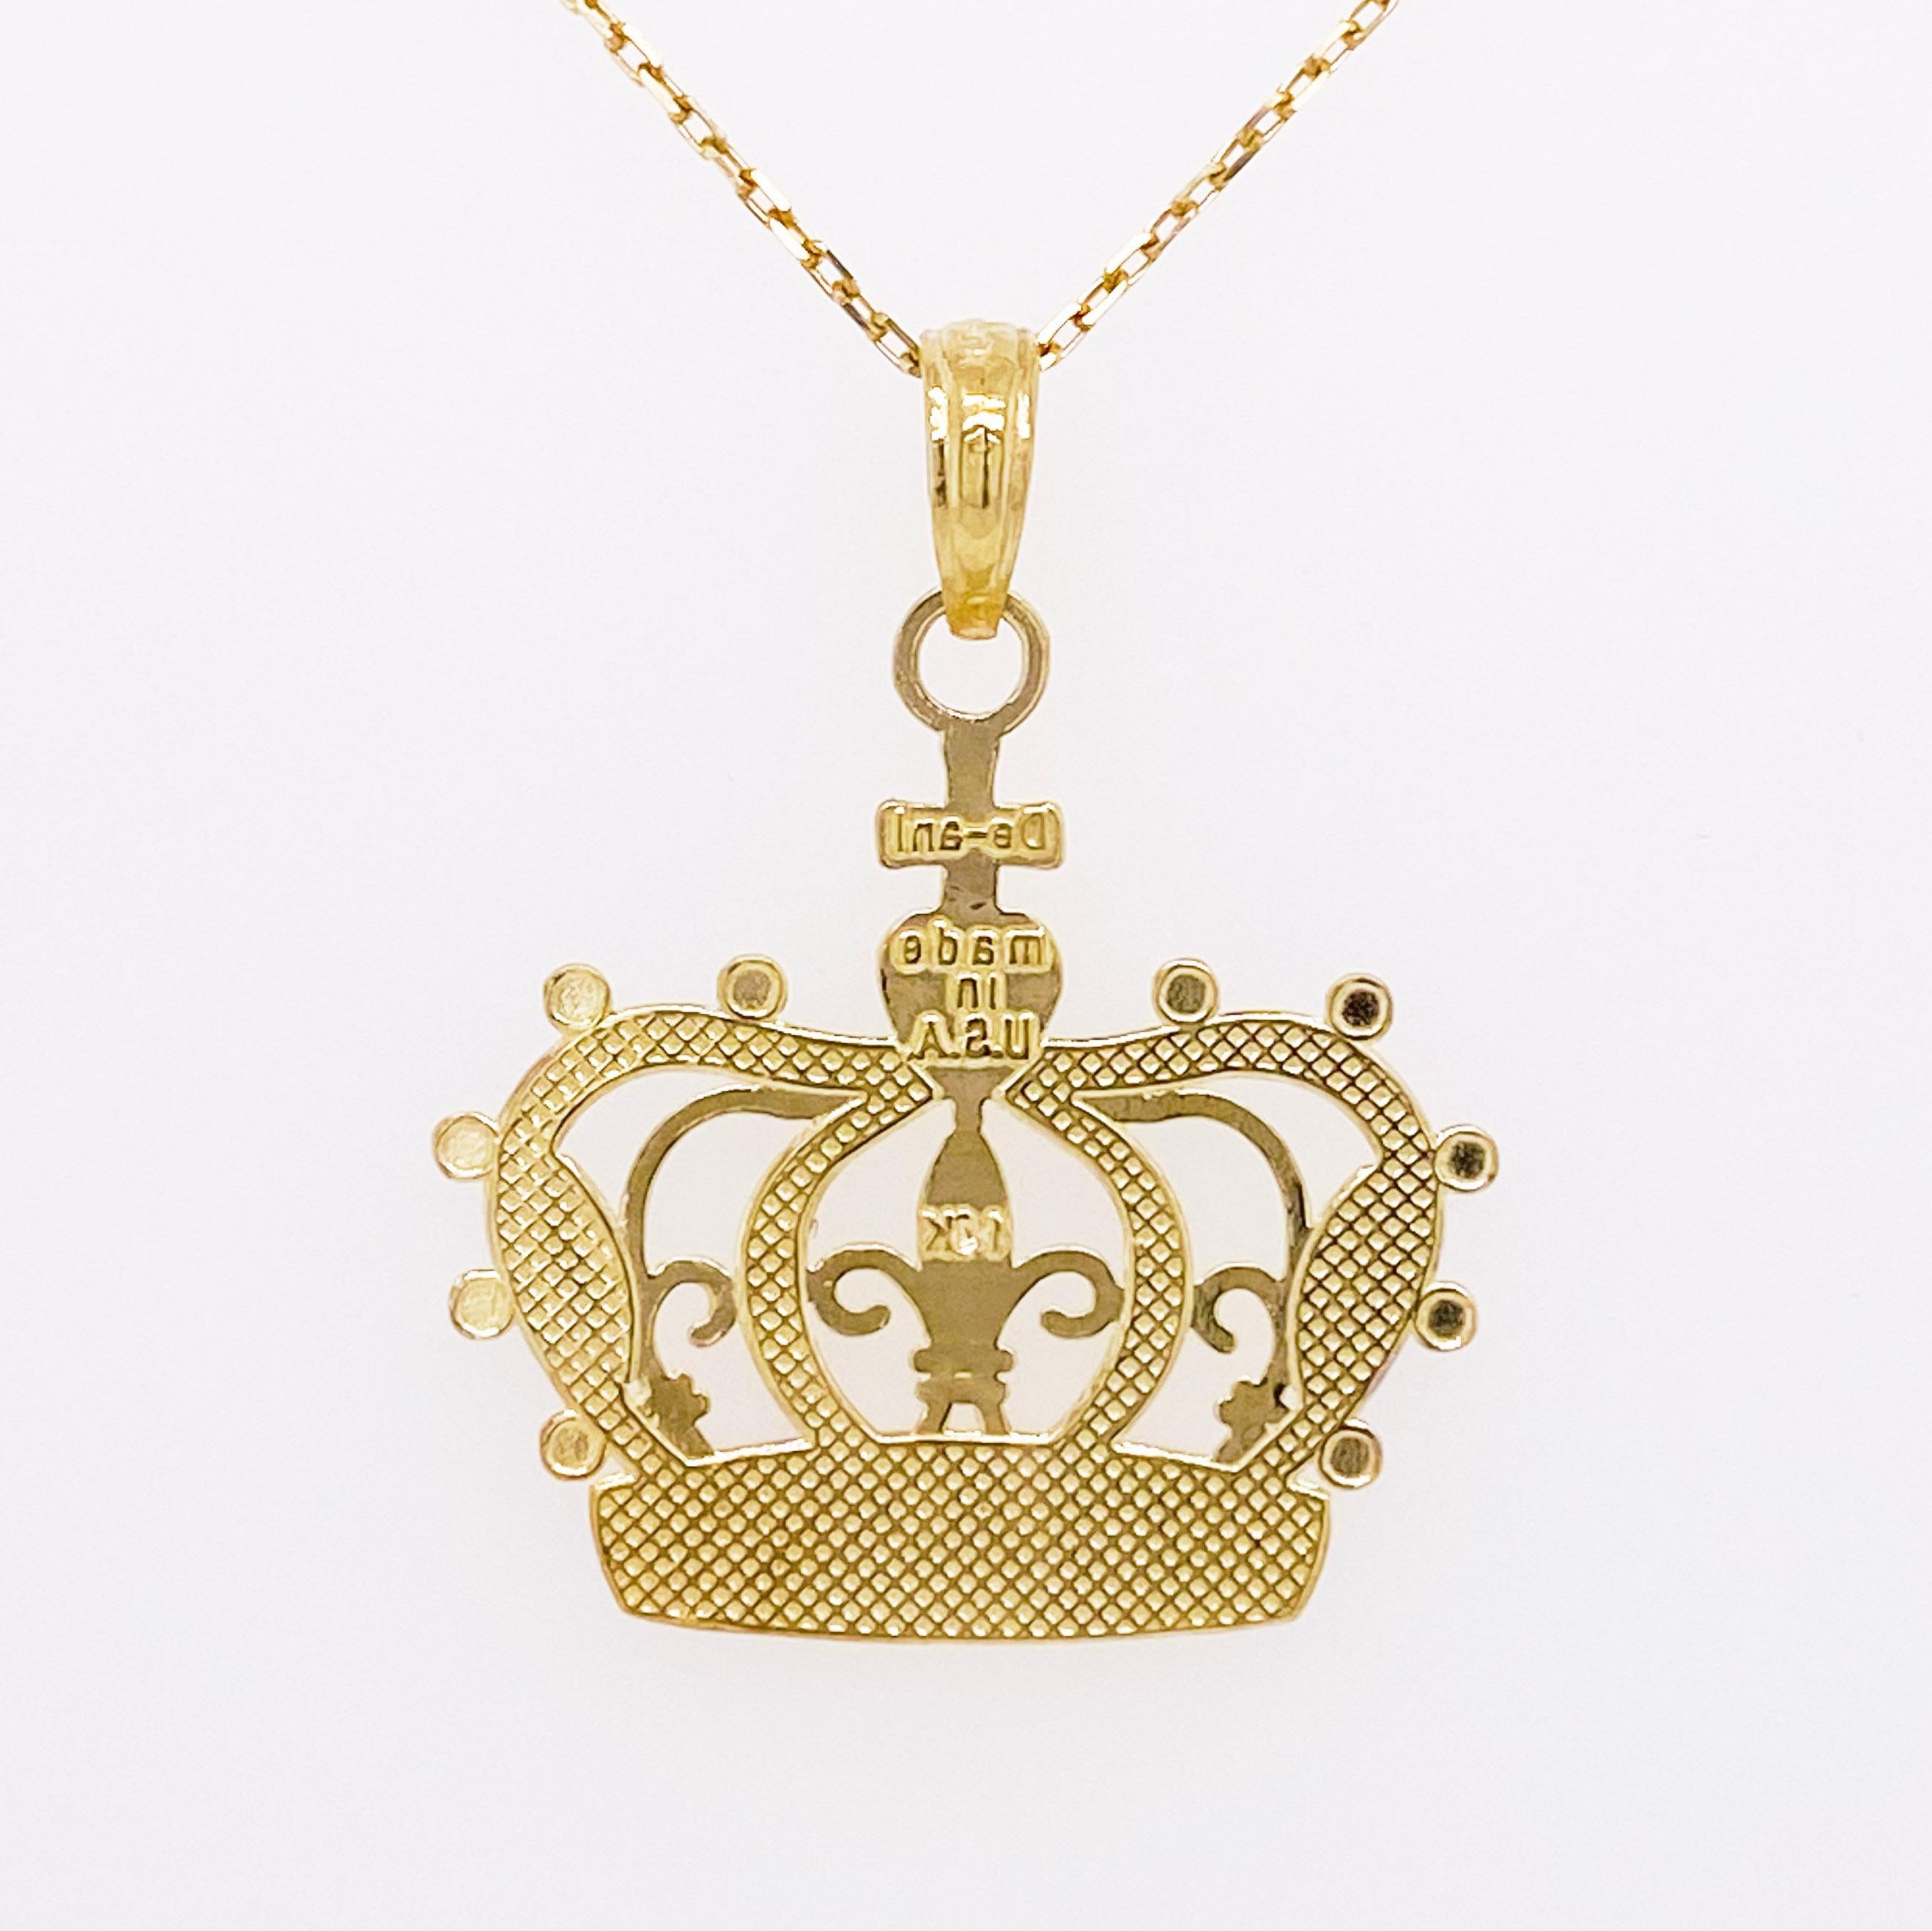 Renaissance Gold Crown Necklace Pendant Mixed Metals You Are A Princess or Queen For Sale